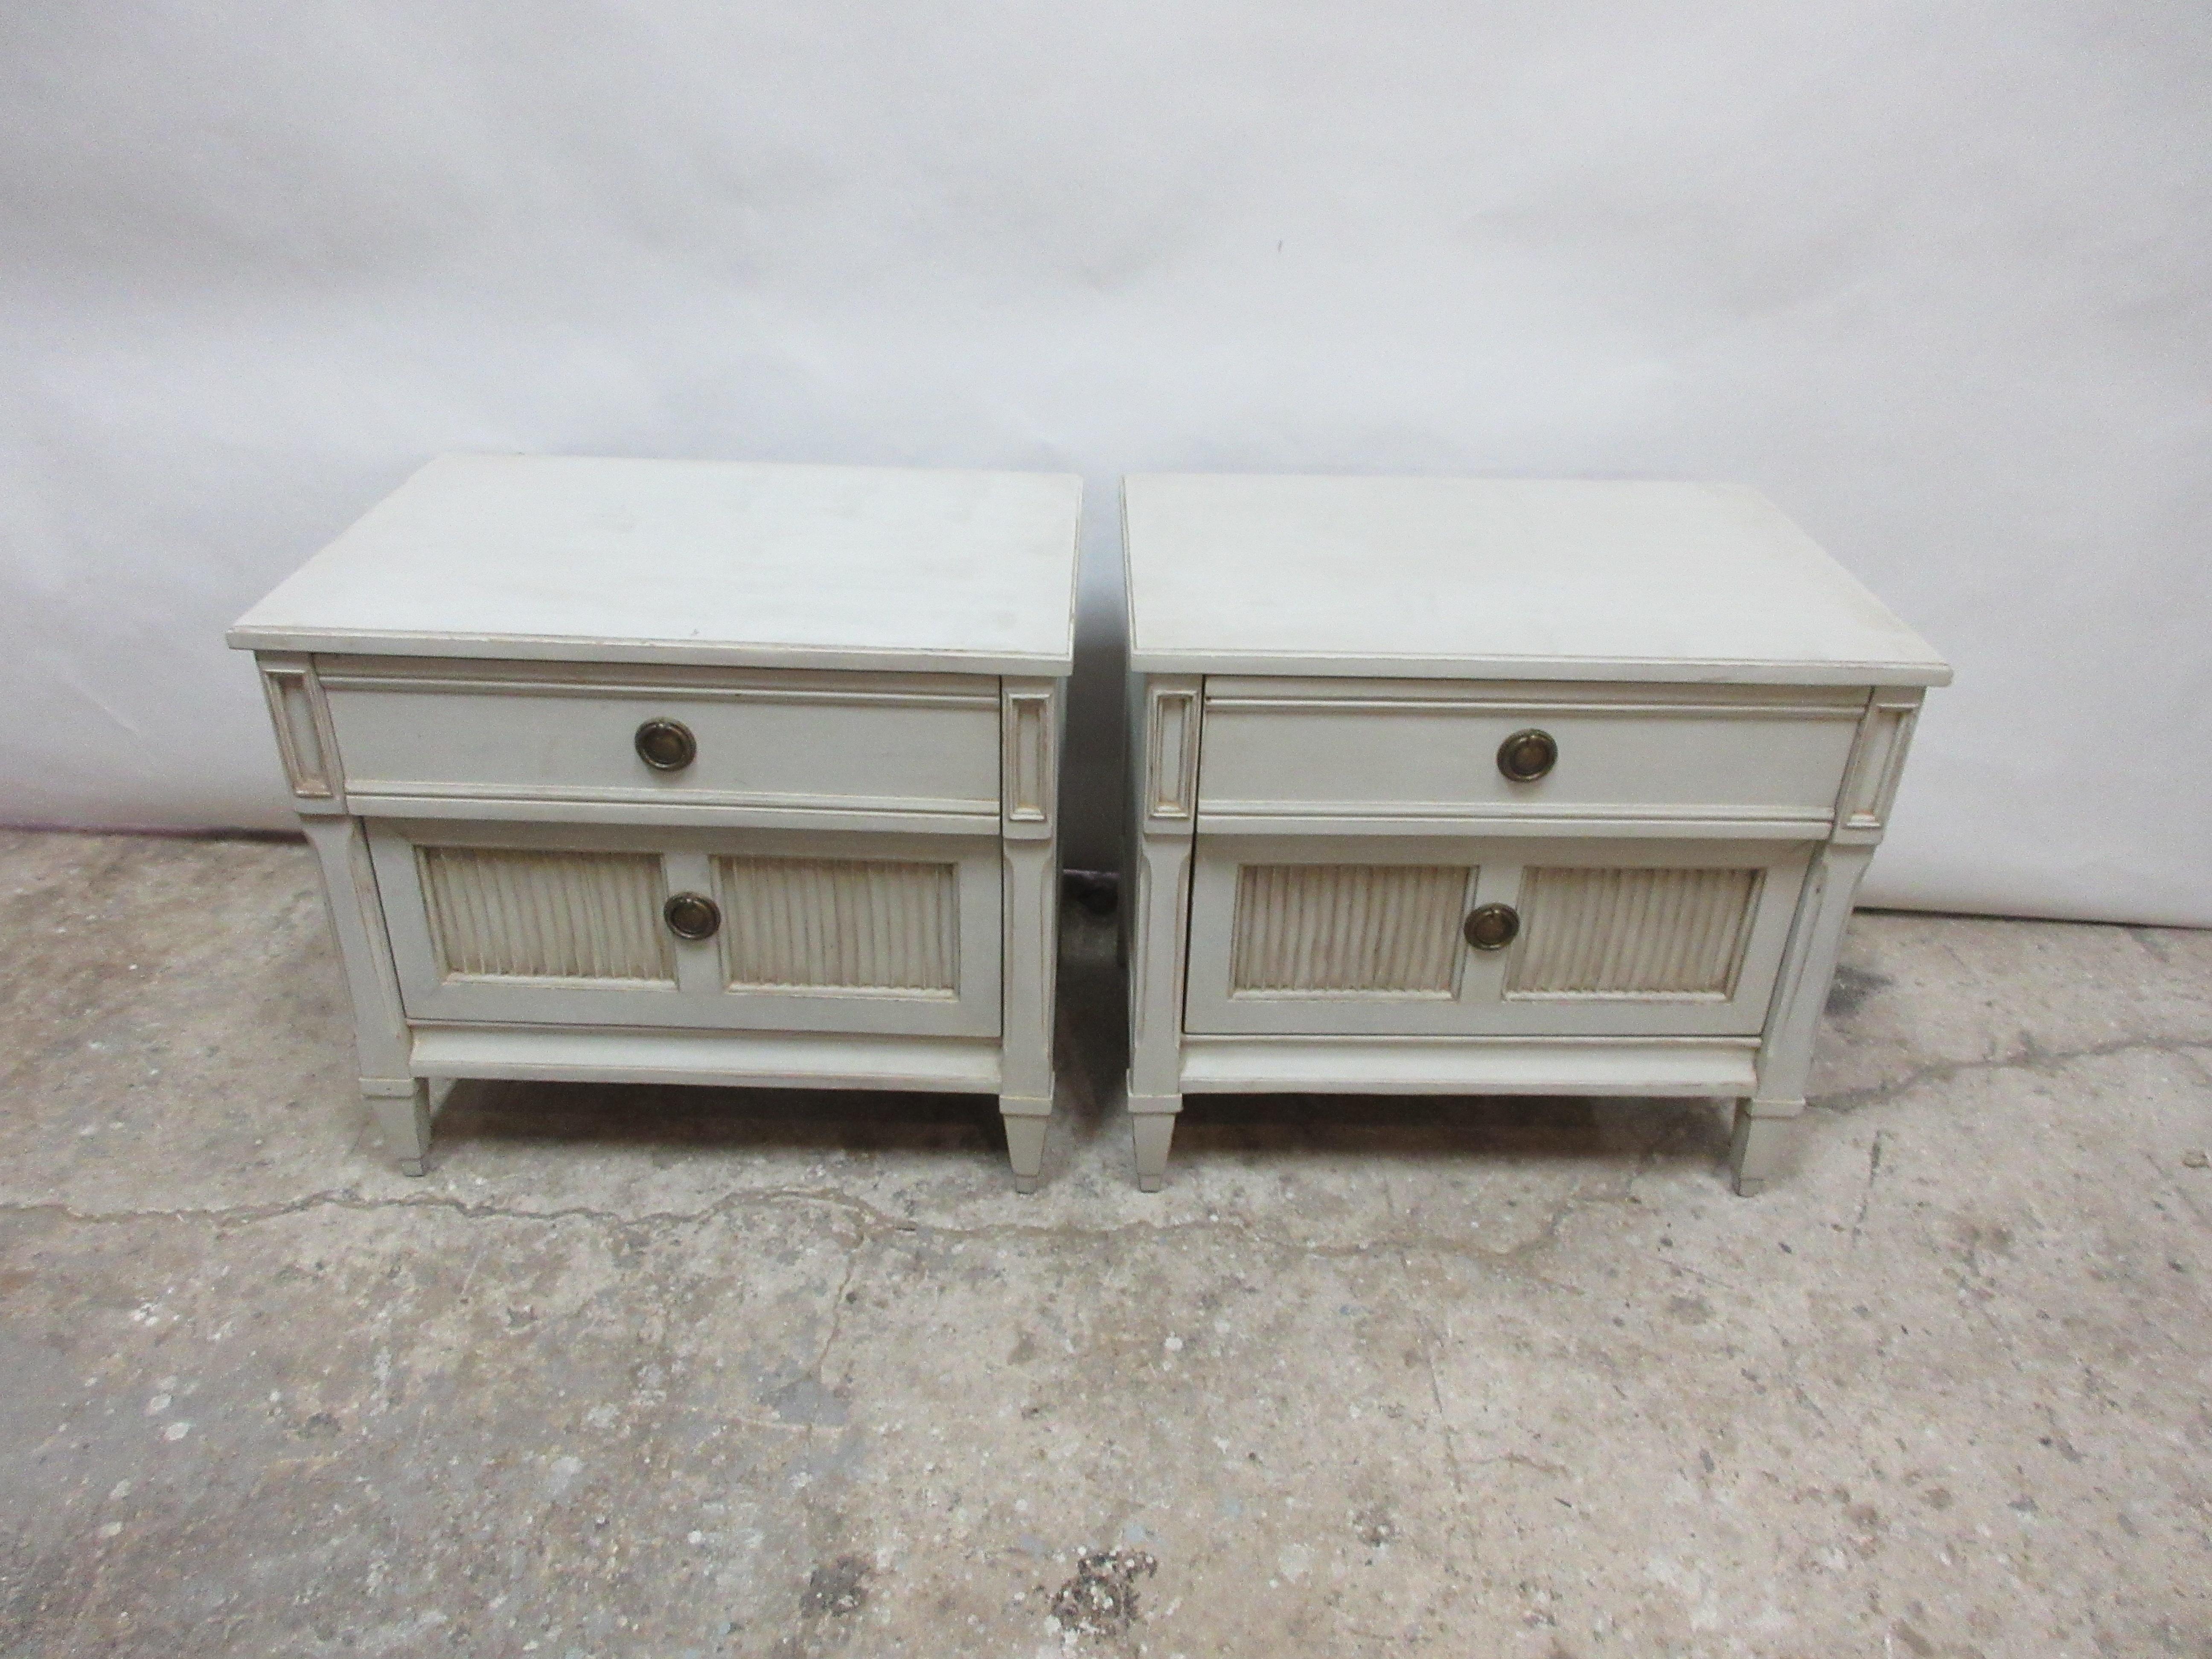 This is a set of 2 Gustavian style nightstands, they have been restored and repainted with milk paints 